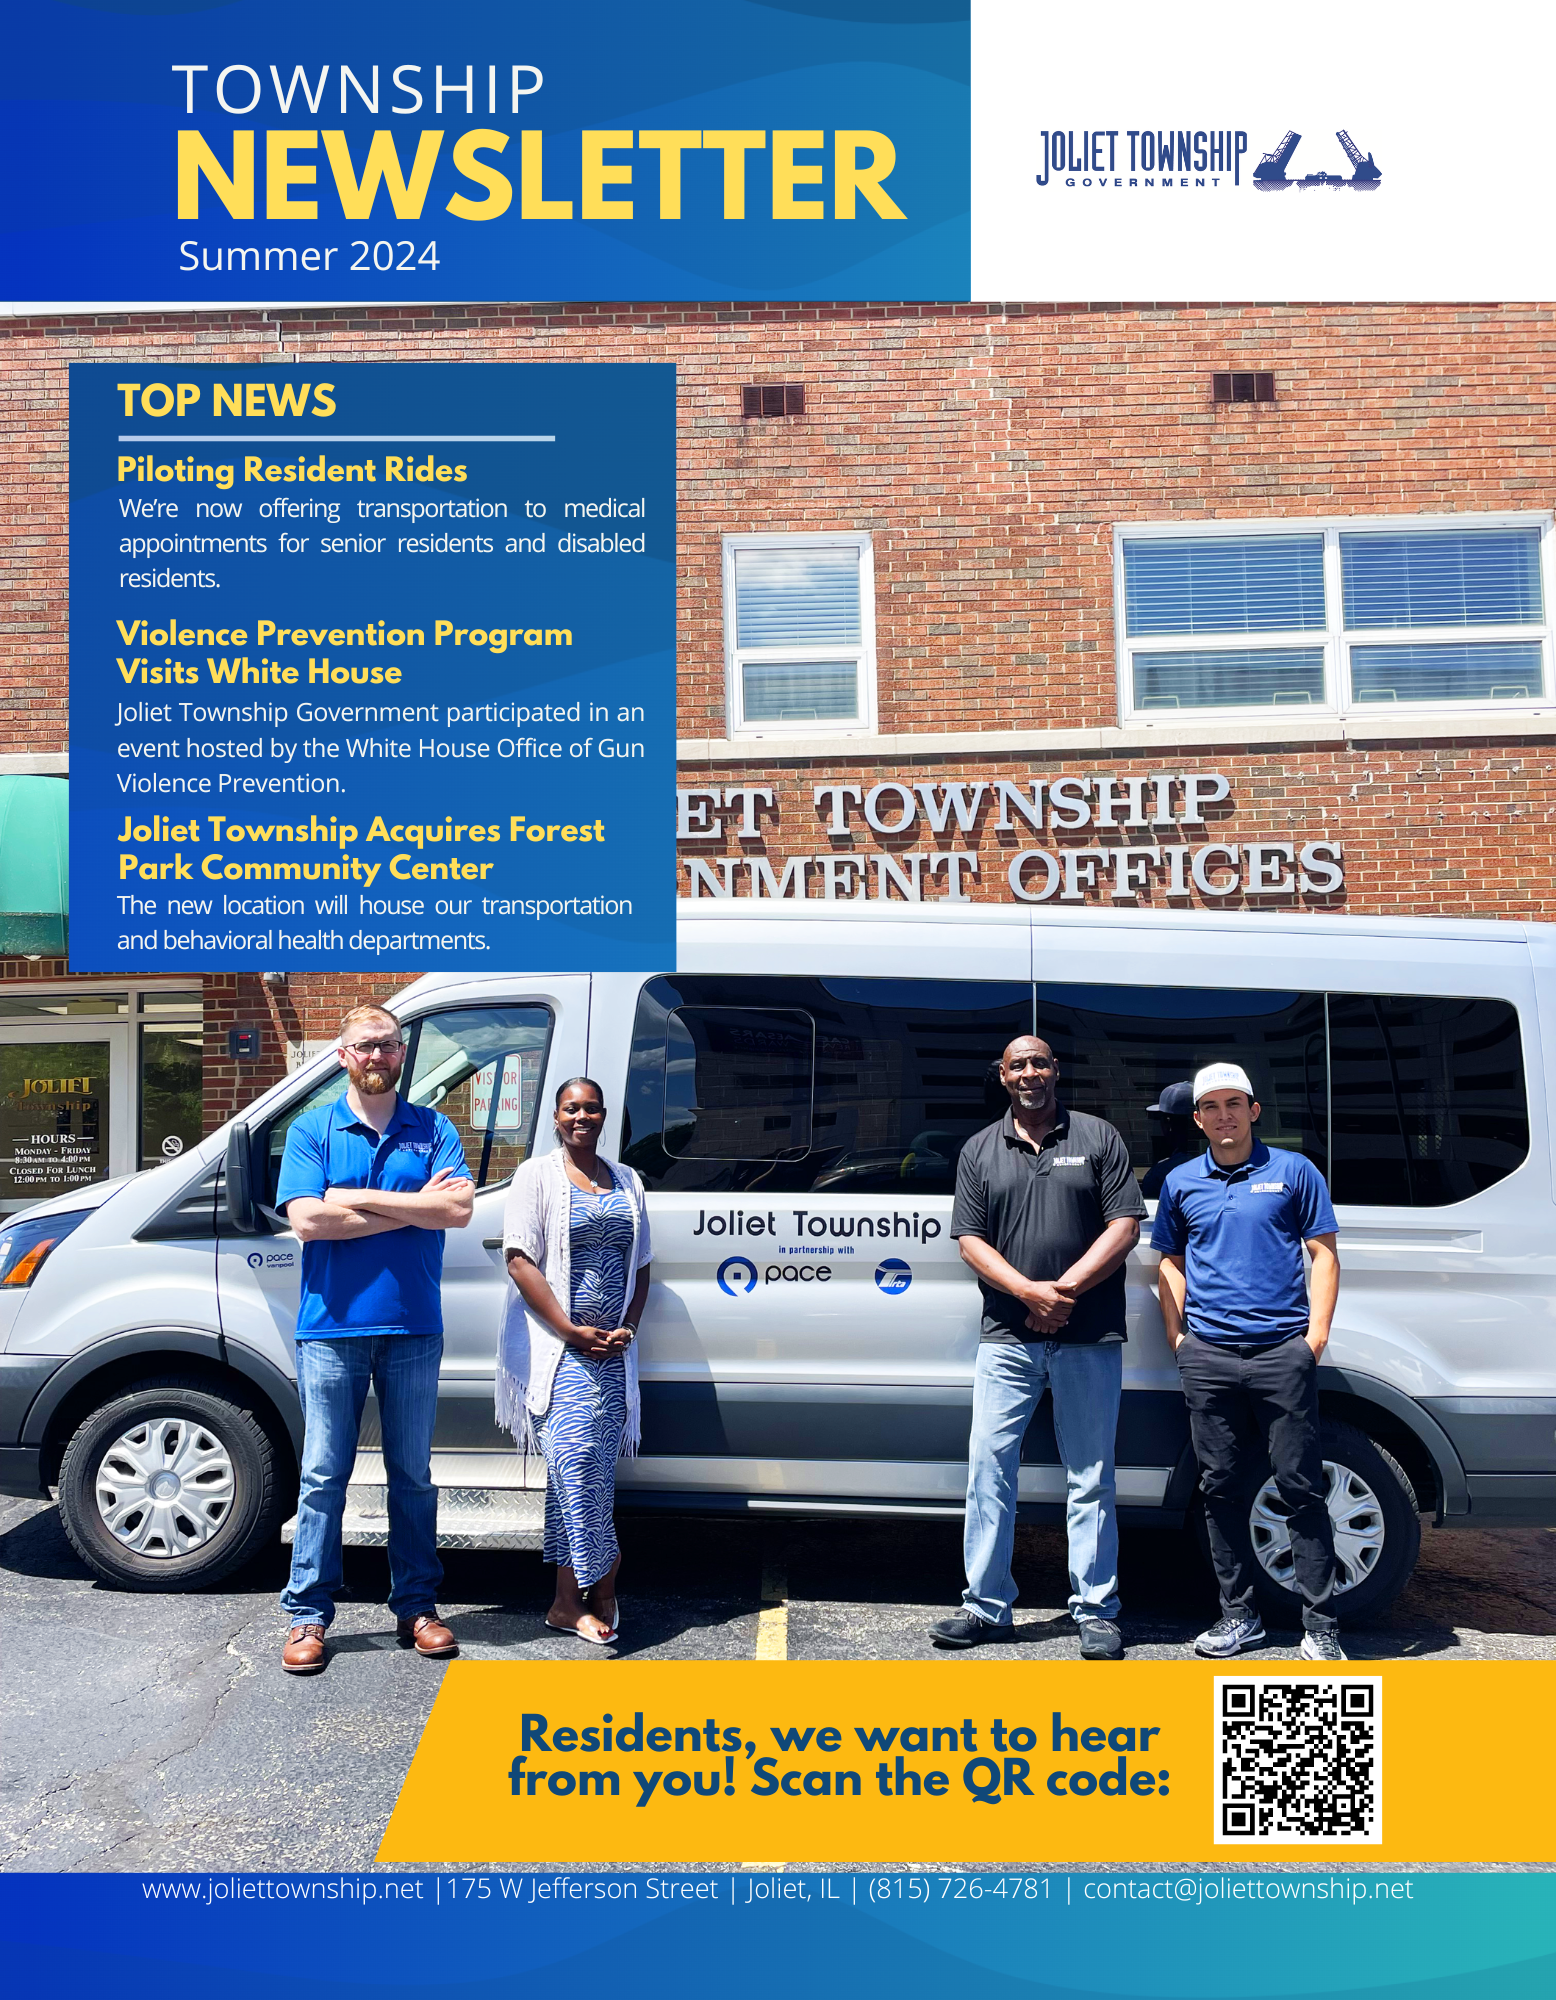 New Services and Accomplishments Highlighted in Joliet Township Government's Summer Newsletter